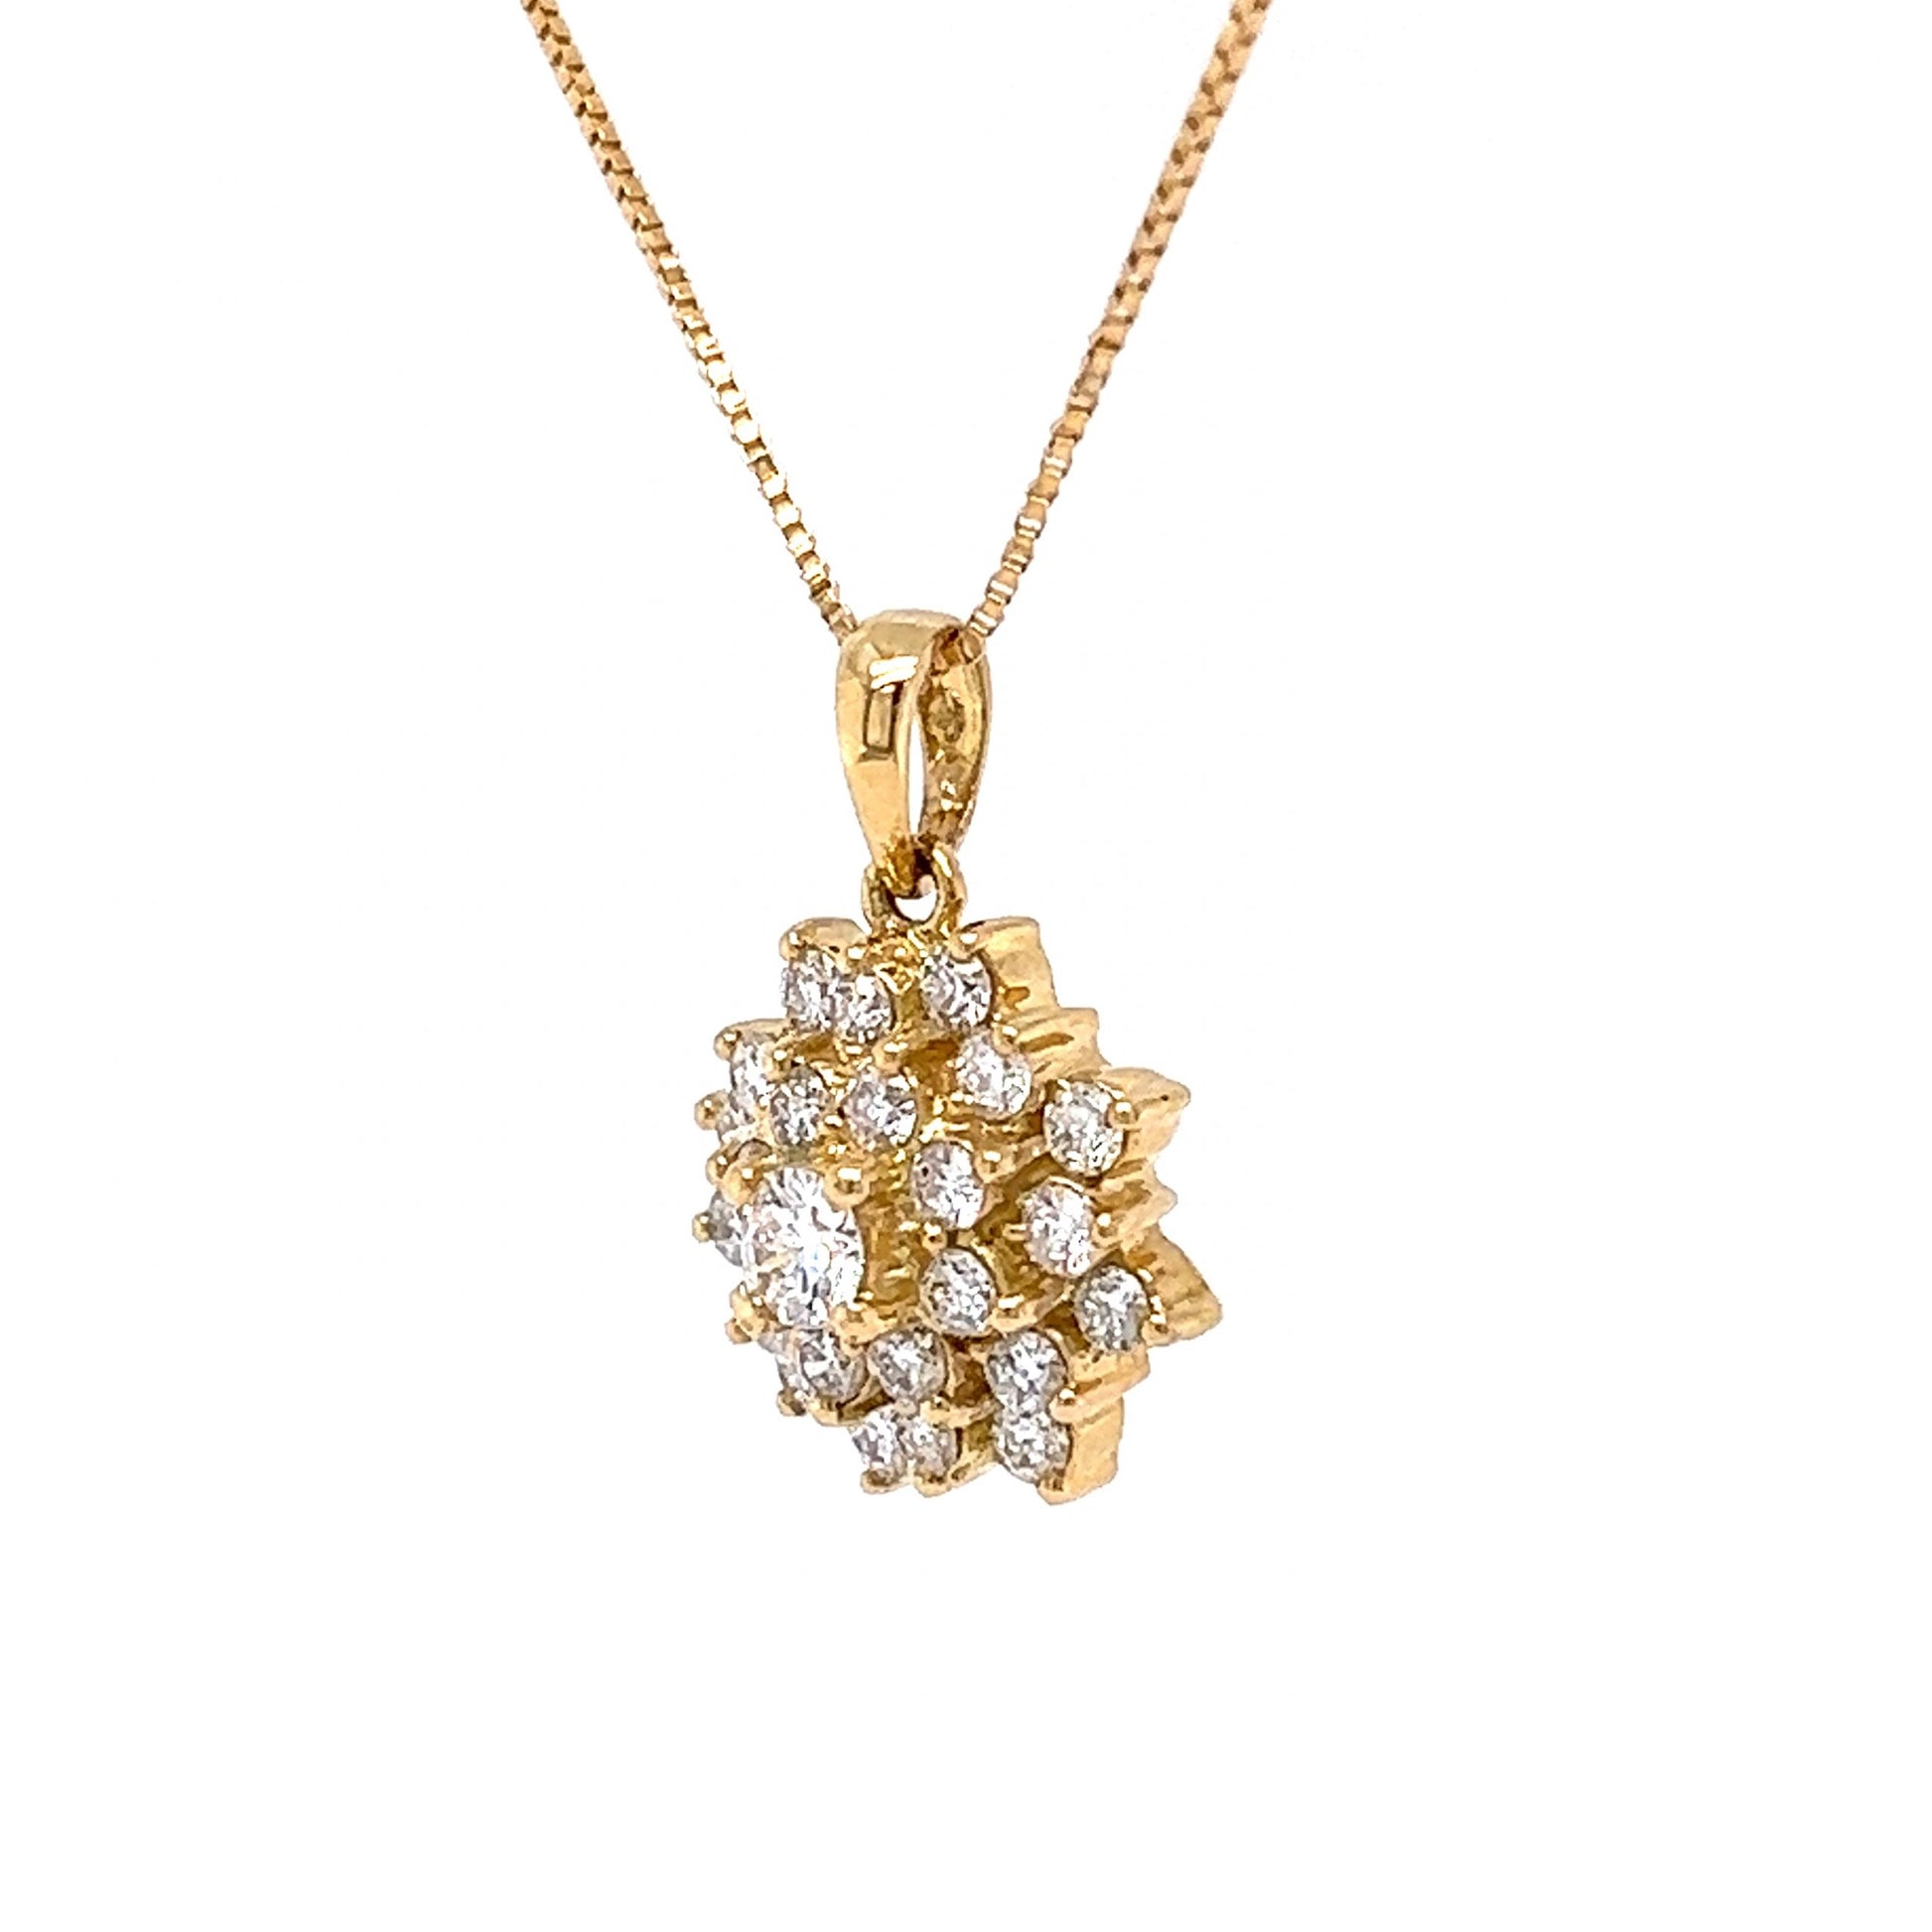 .55 Diamond Cluster Pendant Necklace in 18k Yellow GoldComposition: 18 Karat Yellow GoldTotal Diamond Weight: .55 ctTotal Gram Weight: 2.3 gInscription: 14k ITALY